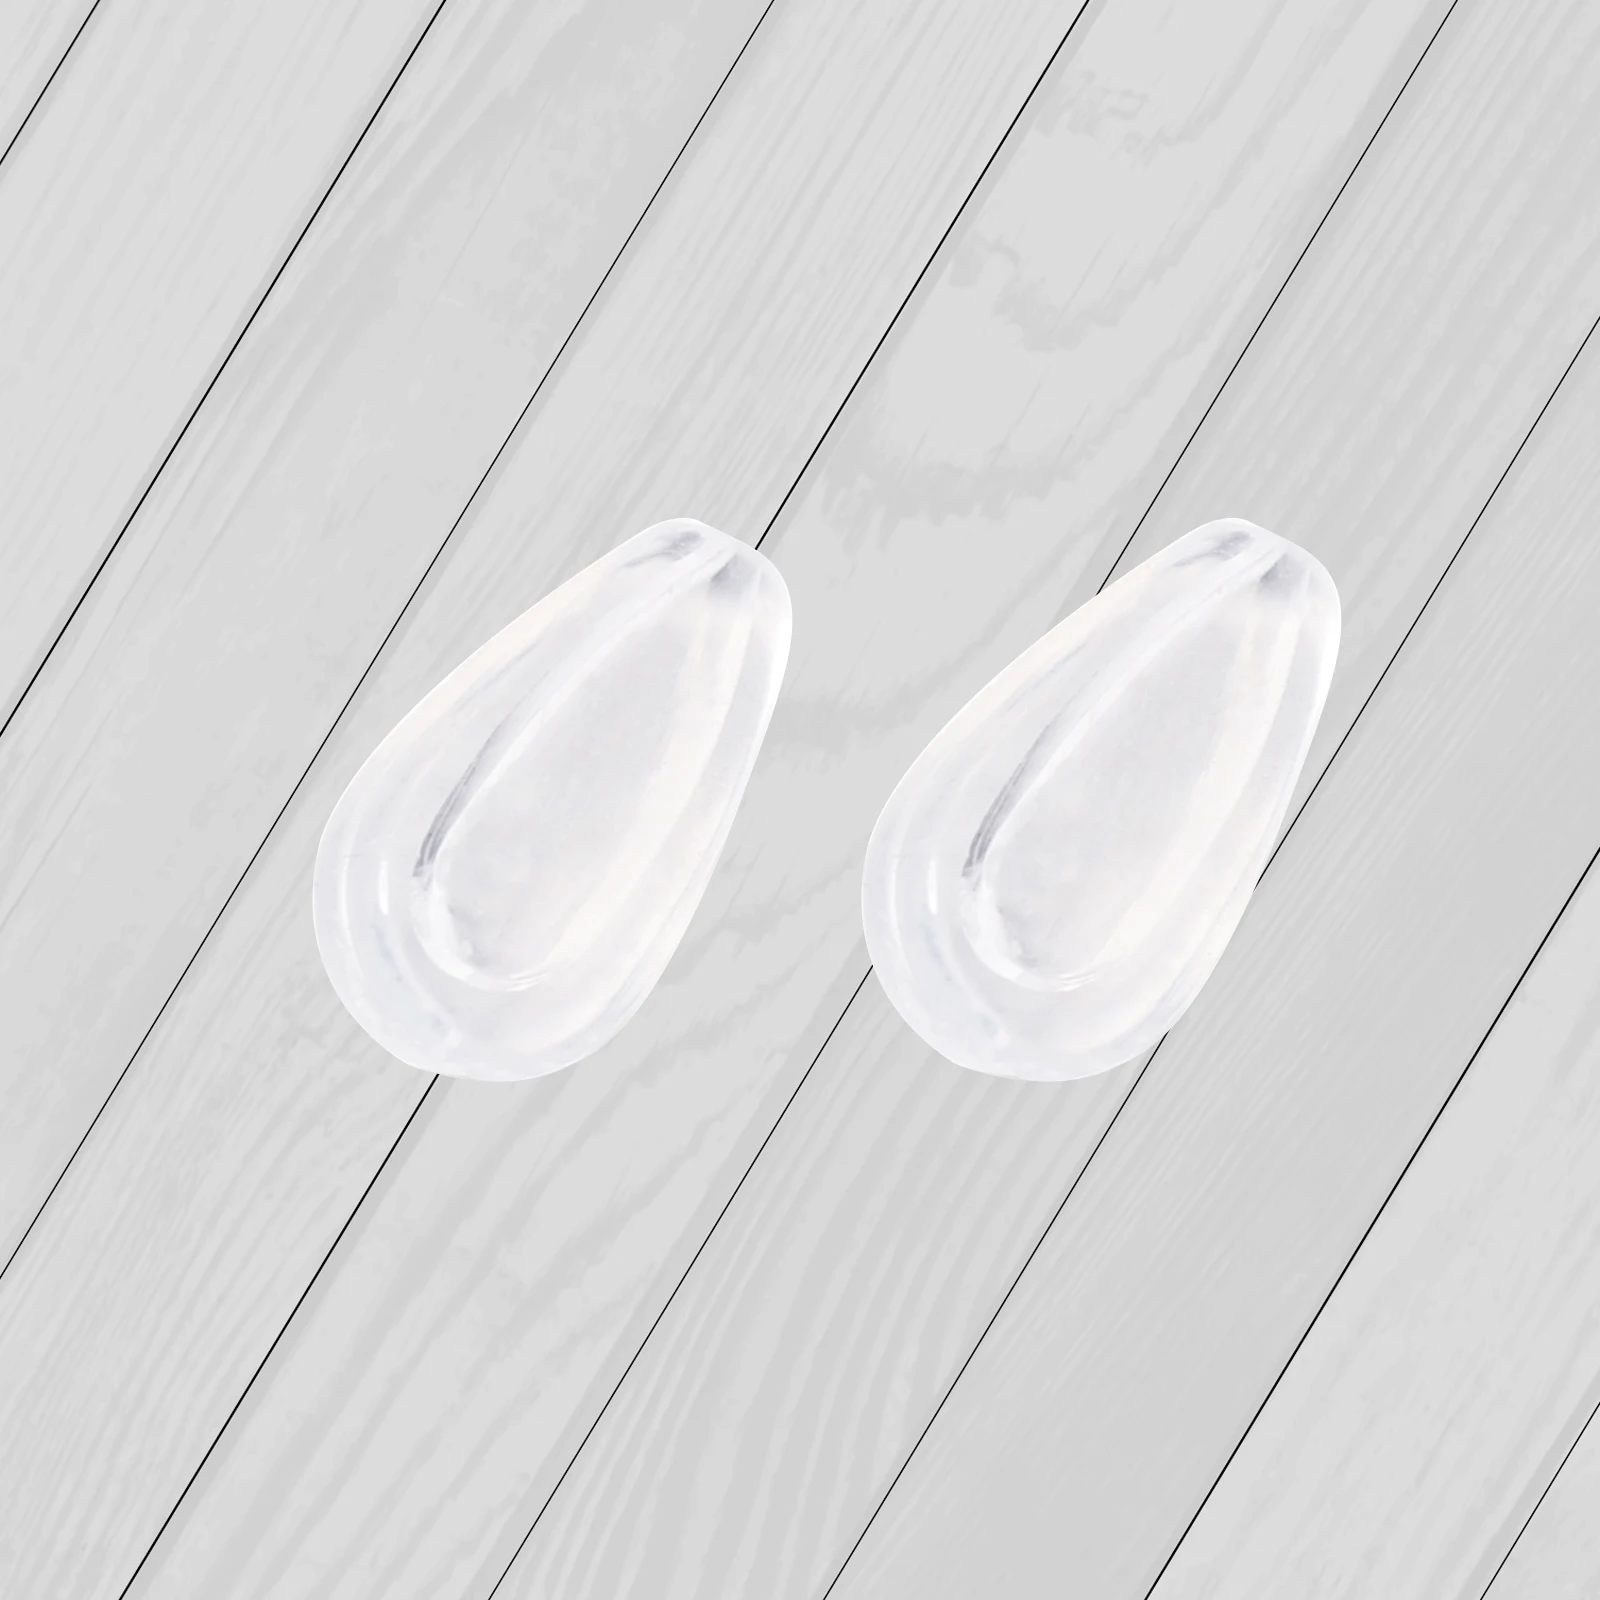 E.O.S Silicon Rubber Replacement Clear Nose Pads for Coach 0HC7251/0HC6185F/0HC5156/0HC6205/0HC6208F/0HC6191BD Frame-Options